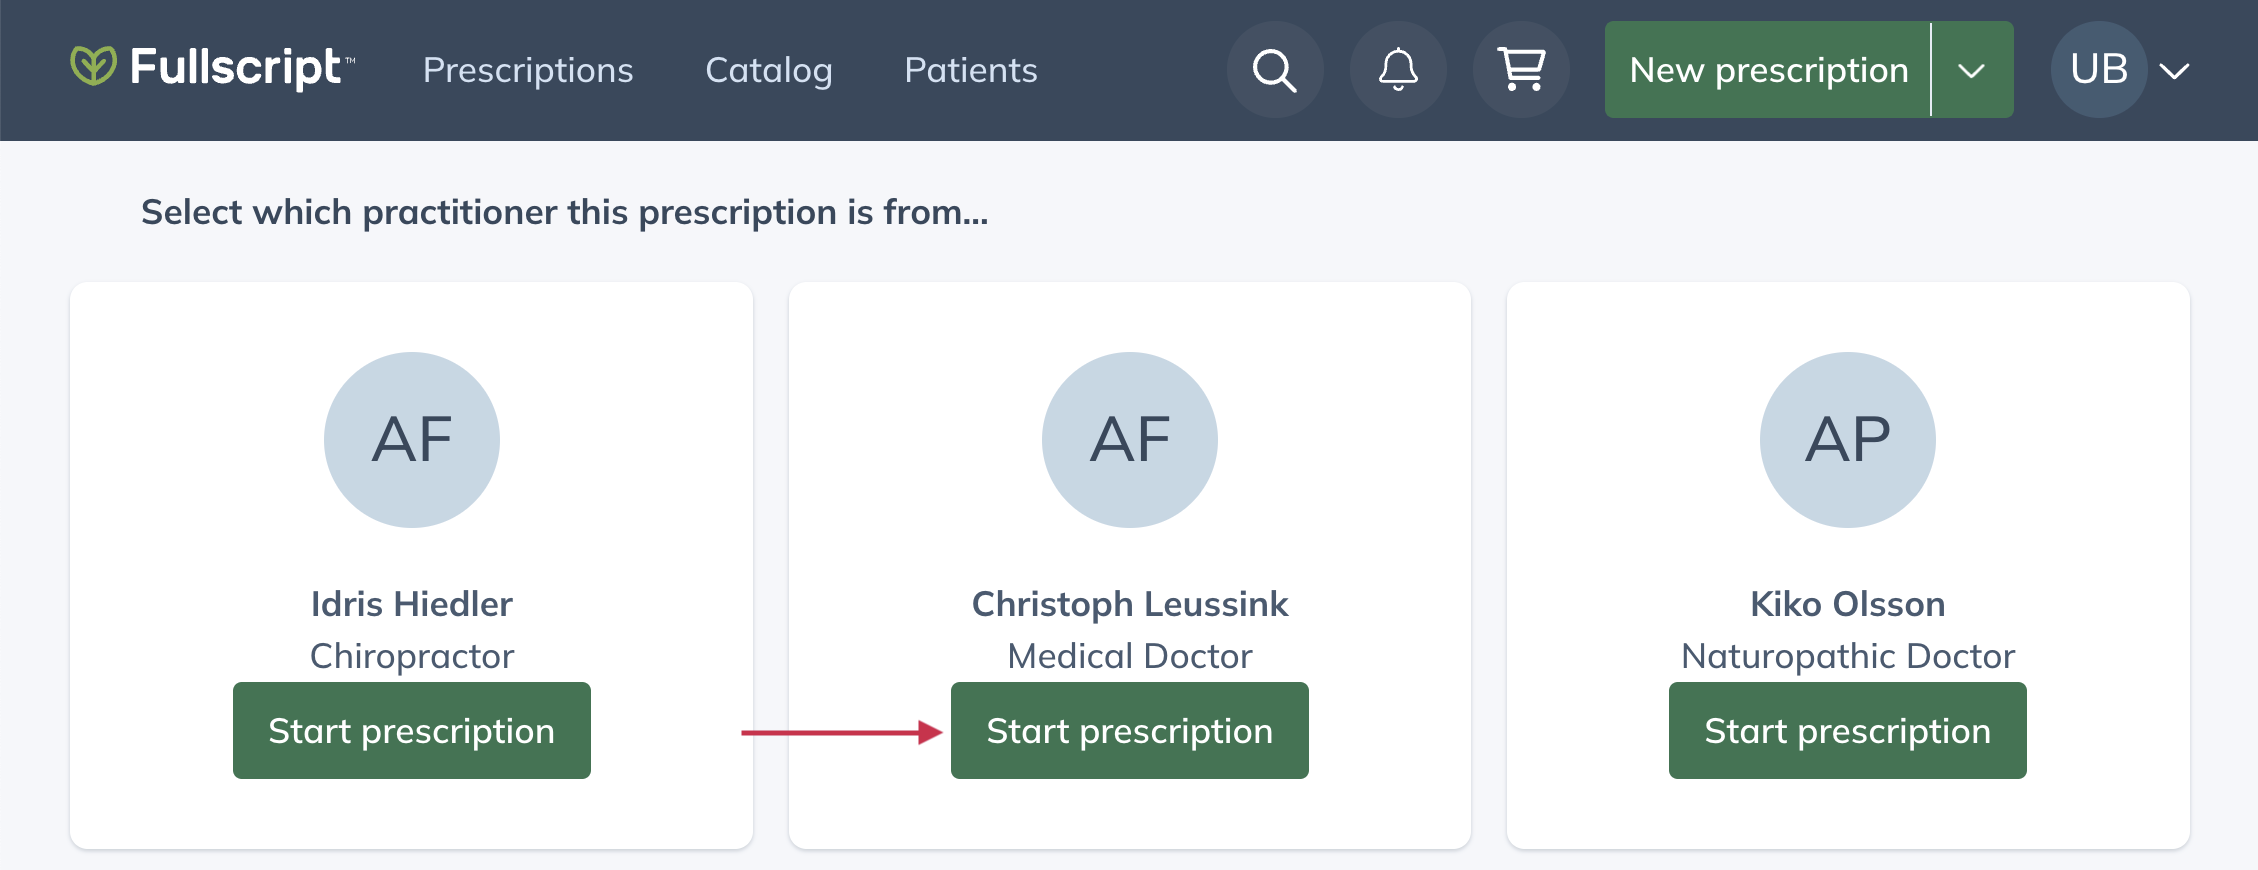 Find the practitioner you're prescribing for and click Start Prescription under their name.